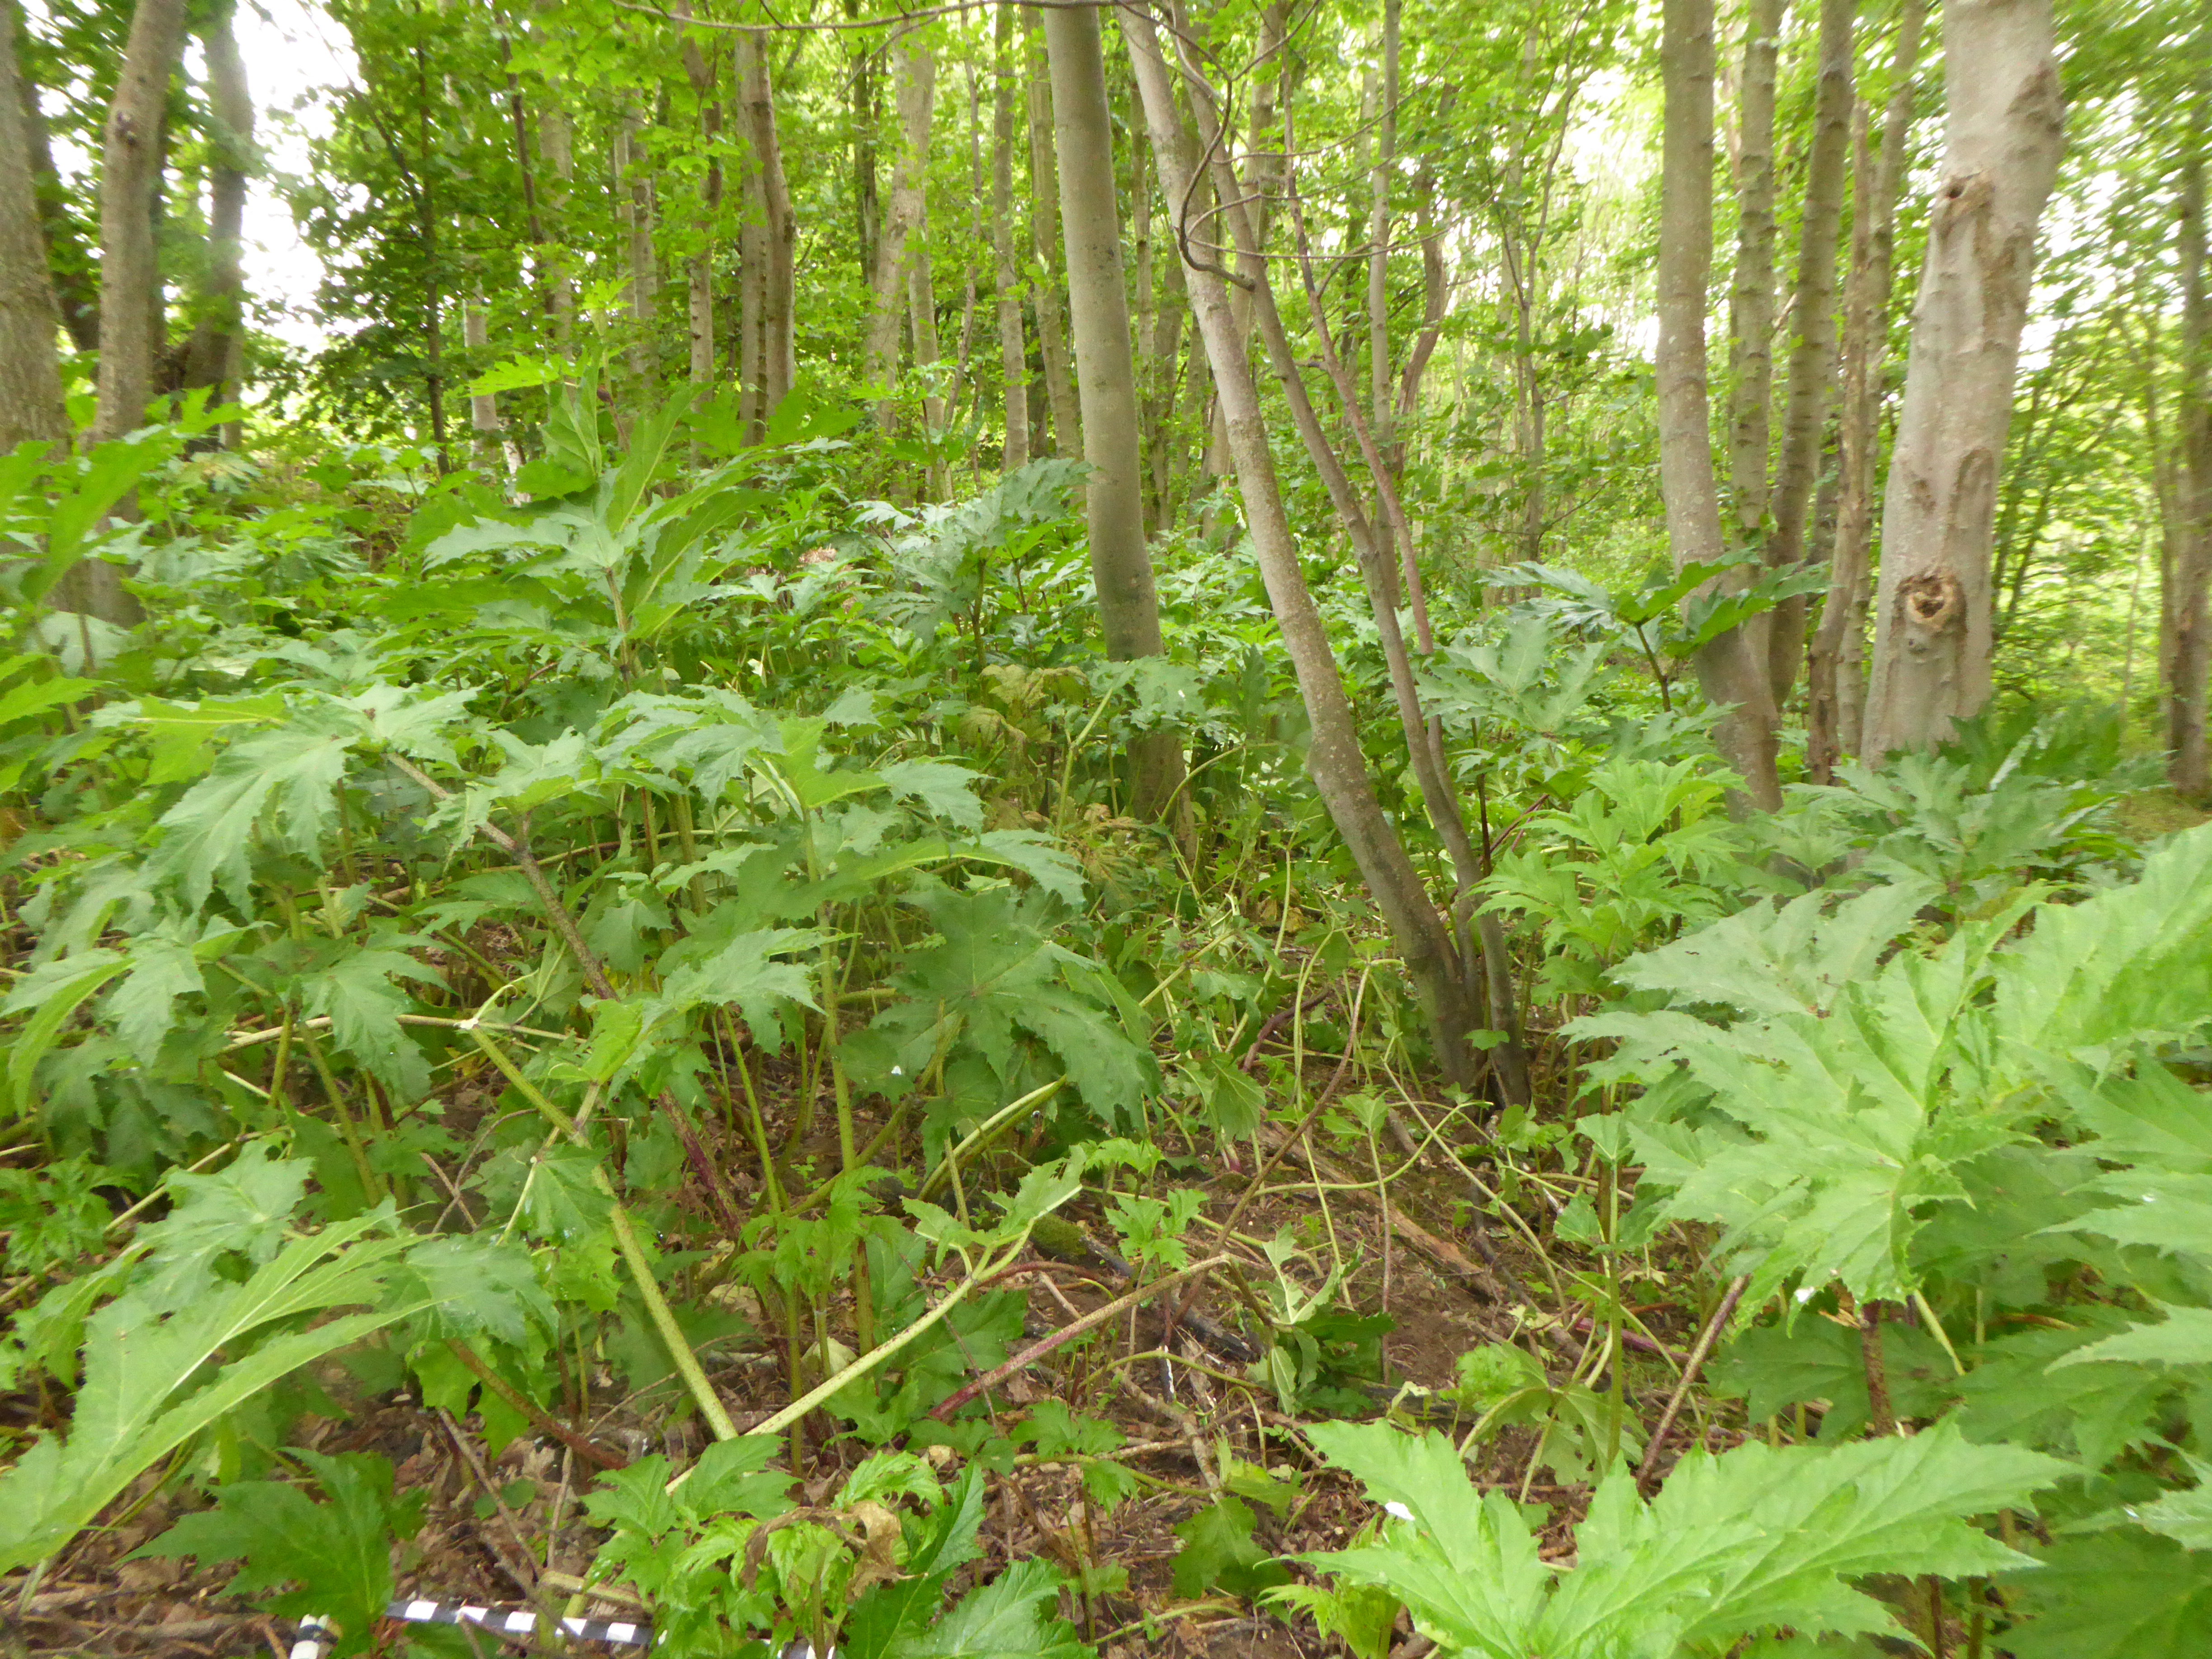 Dense stands of mature giant hogweed plants visible at monitoring point